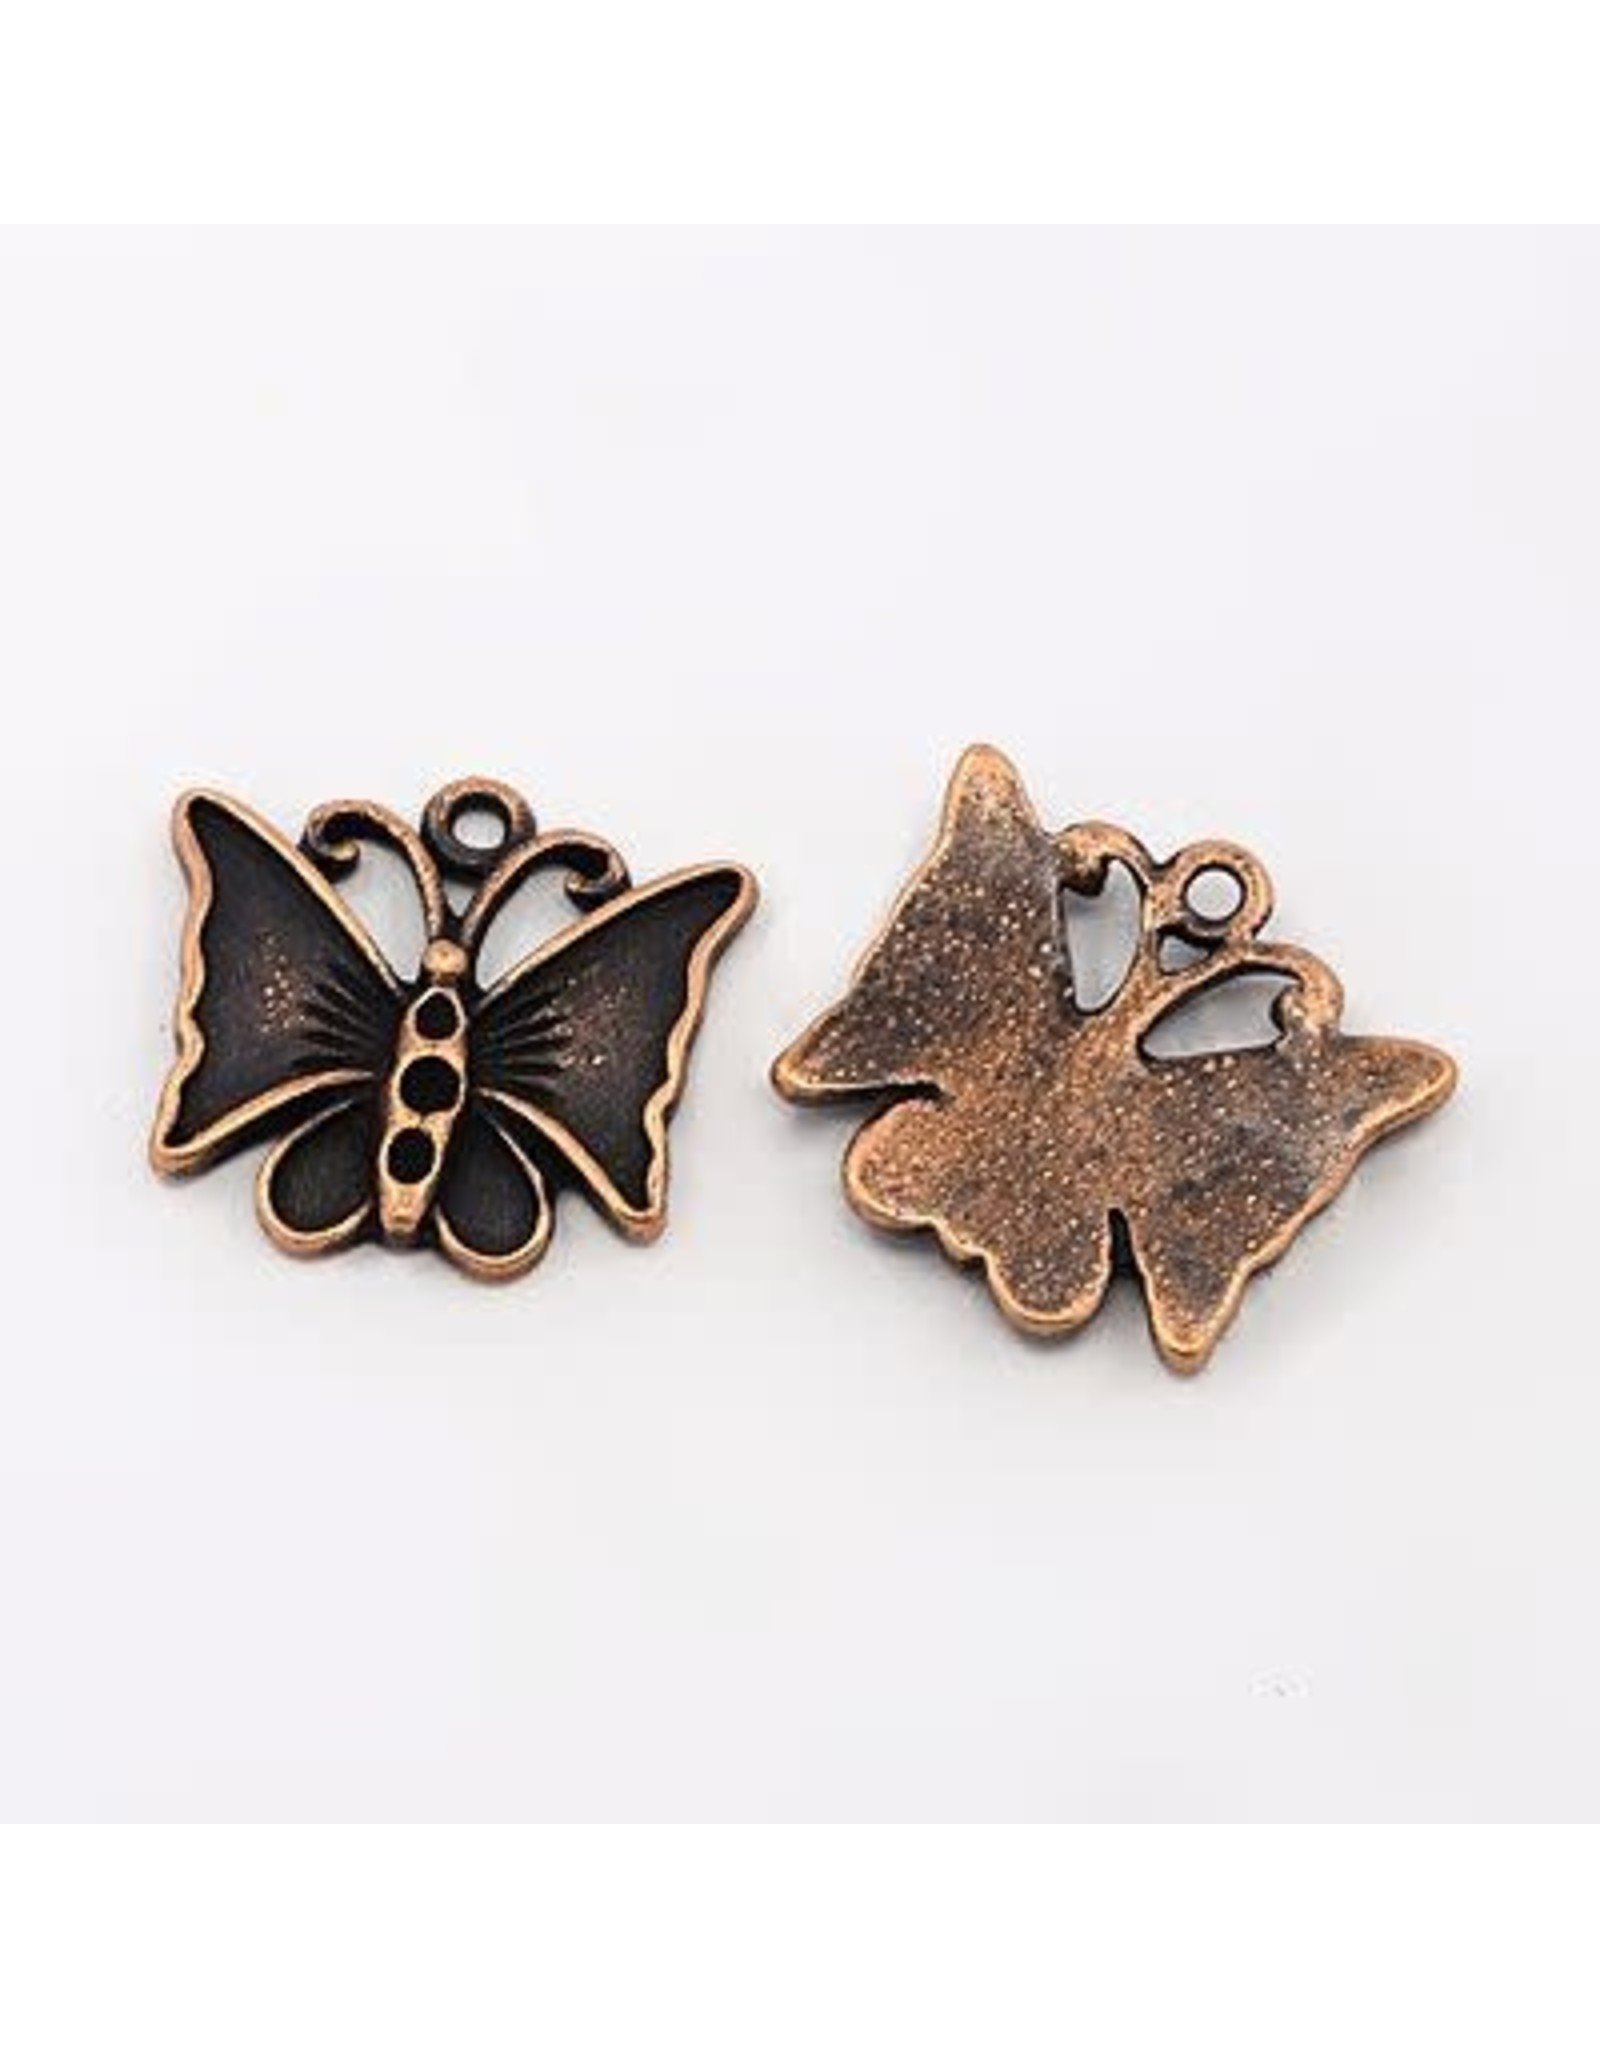 Butterfly 17x18mm Antique Copper x5  NF